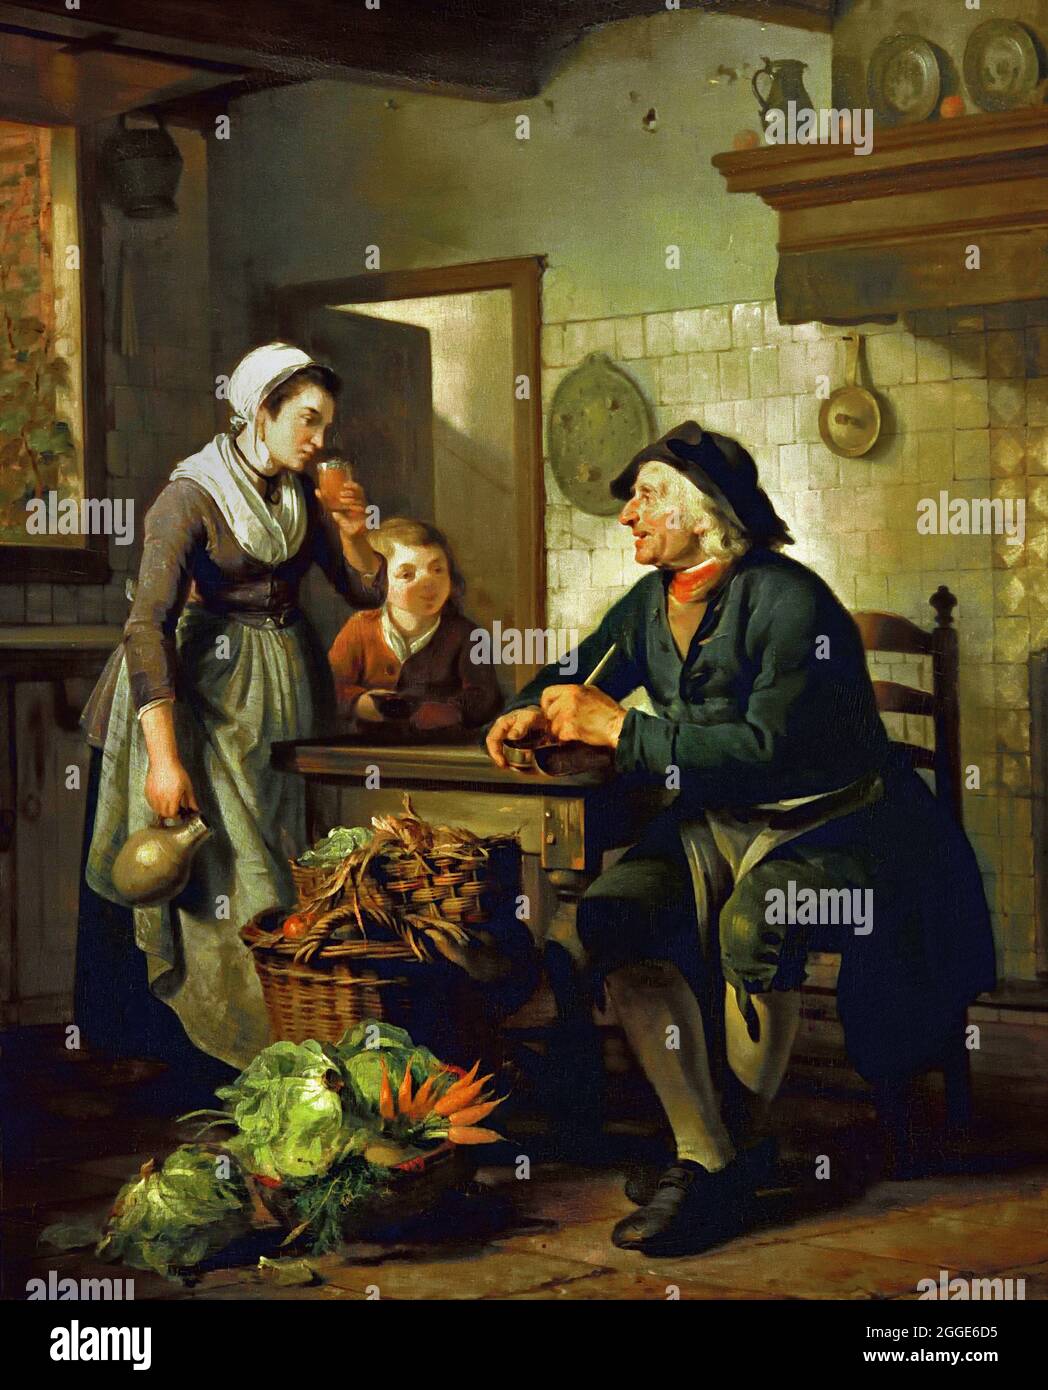 Morning visit 1796 Adriaan de Lelie, 1755-1820 oil on panel, Dutch, The Netherland. ( Old Dutch kitchen and cake baker in the  room.  baskets with vegetables, earthenware jug, tin, fireplace, copper, ) Stock Photo